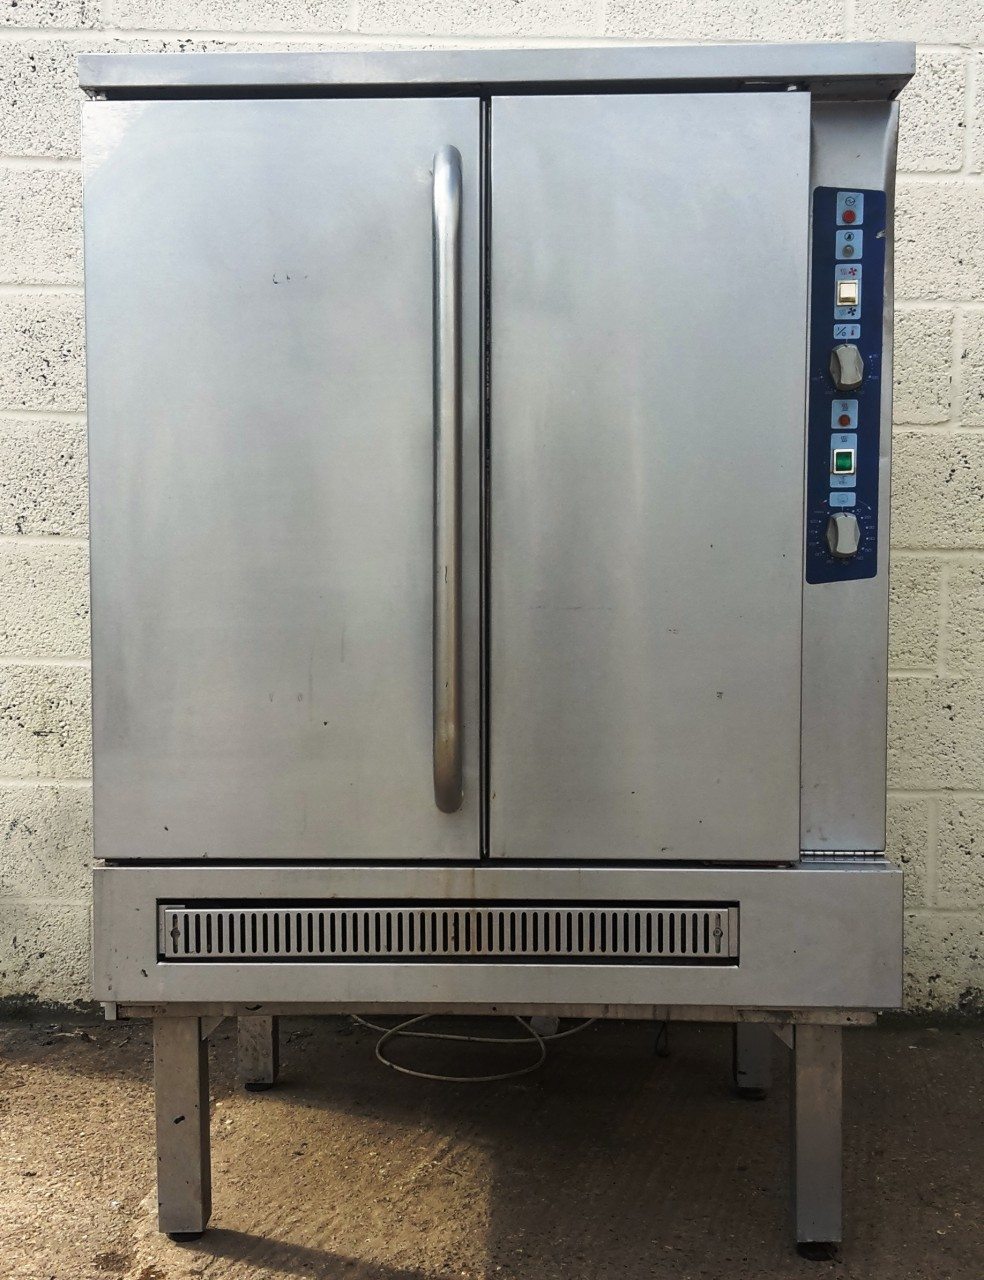 FALCON 110 Cook and Hold Convection Oven – Clearance Item